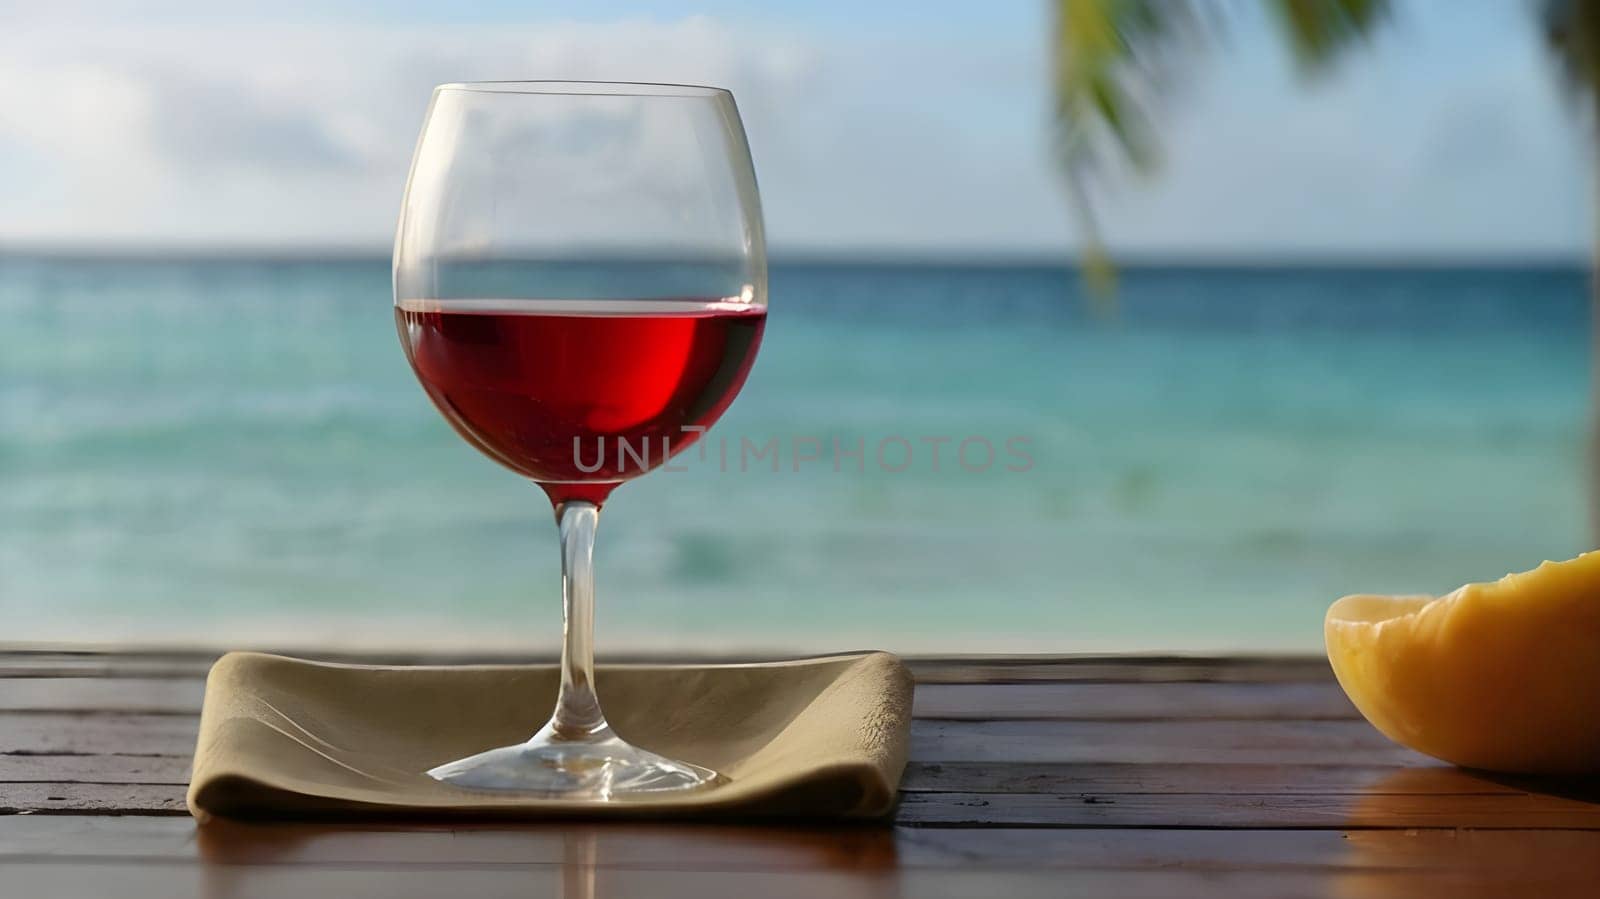 A glass of red wine sits on a beige cloth napkin on a wooden table. The wine is dark red and the glass is half full. The table is in front of a blue-green ocean with white waves crashing on the shore. The sky